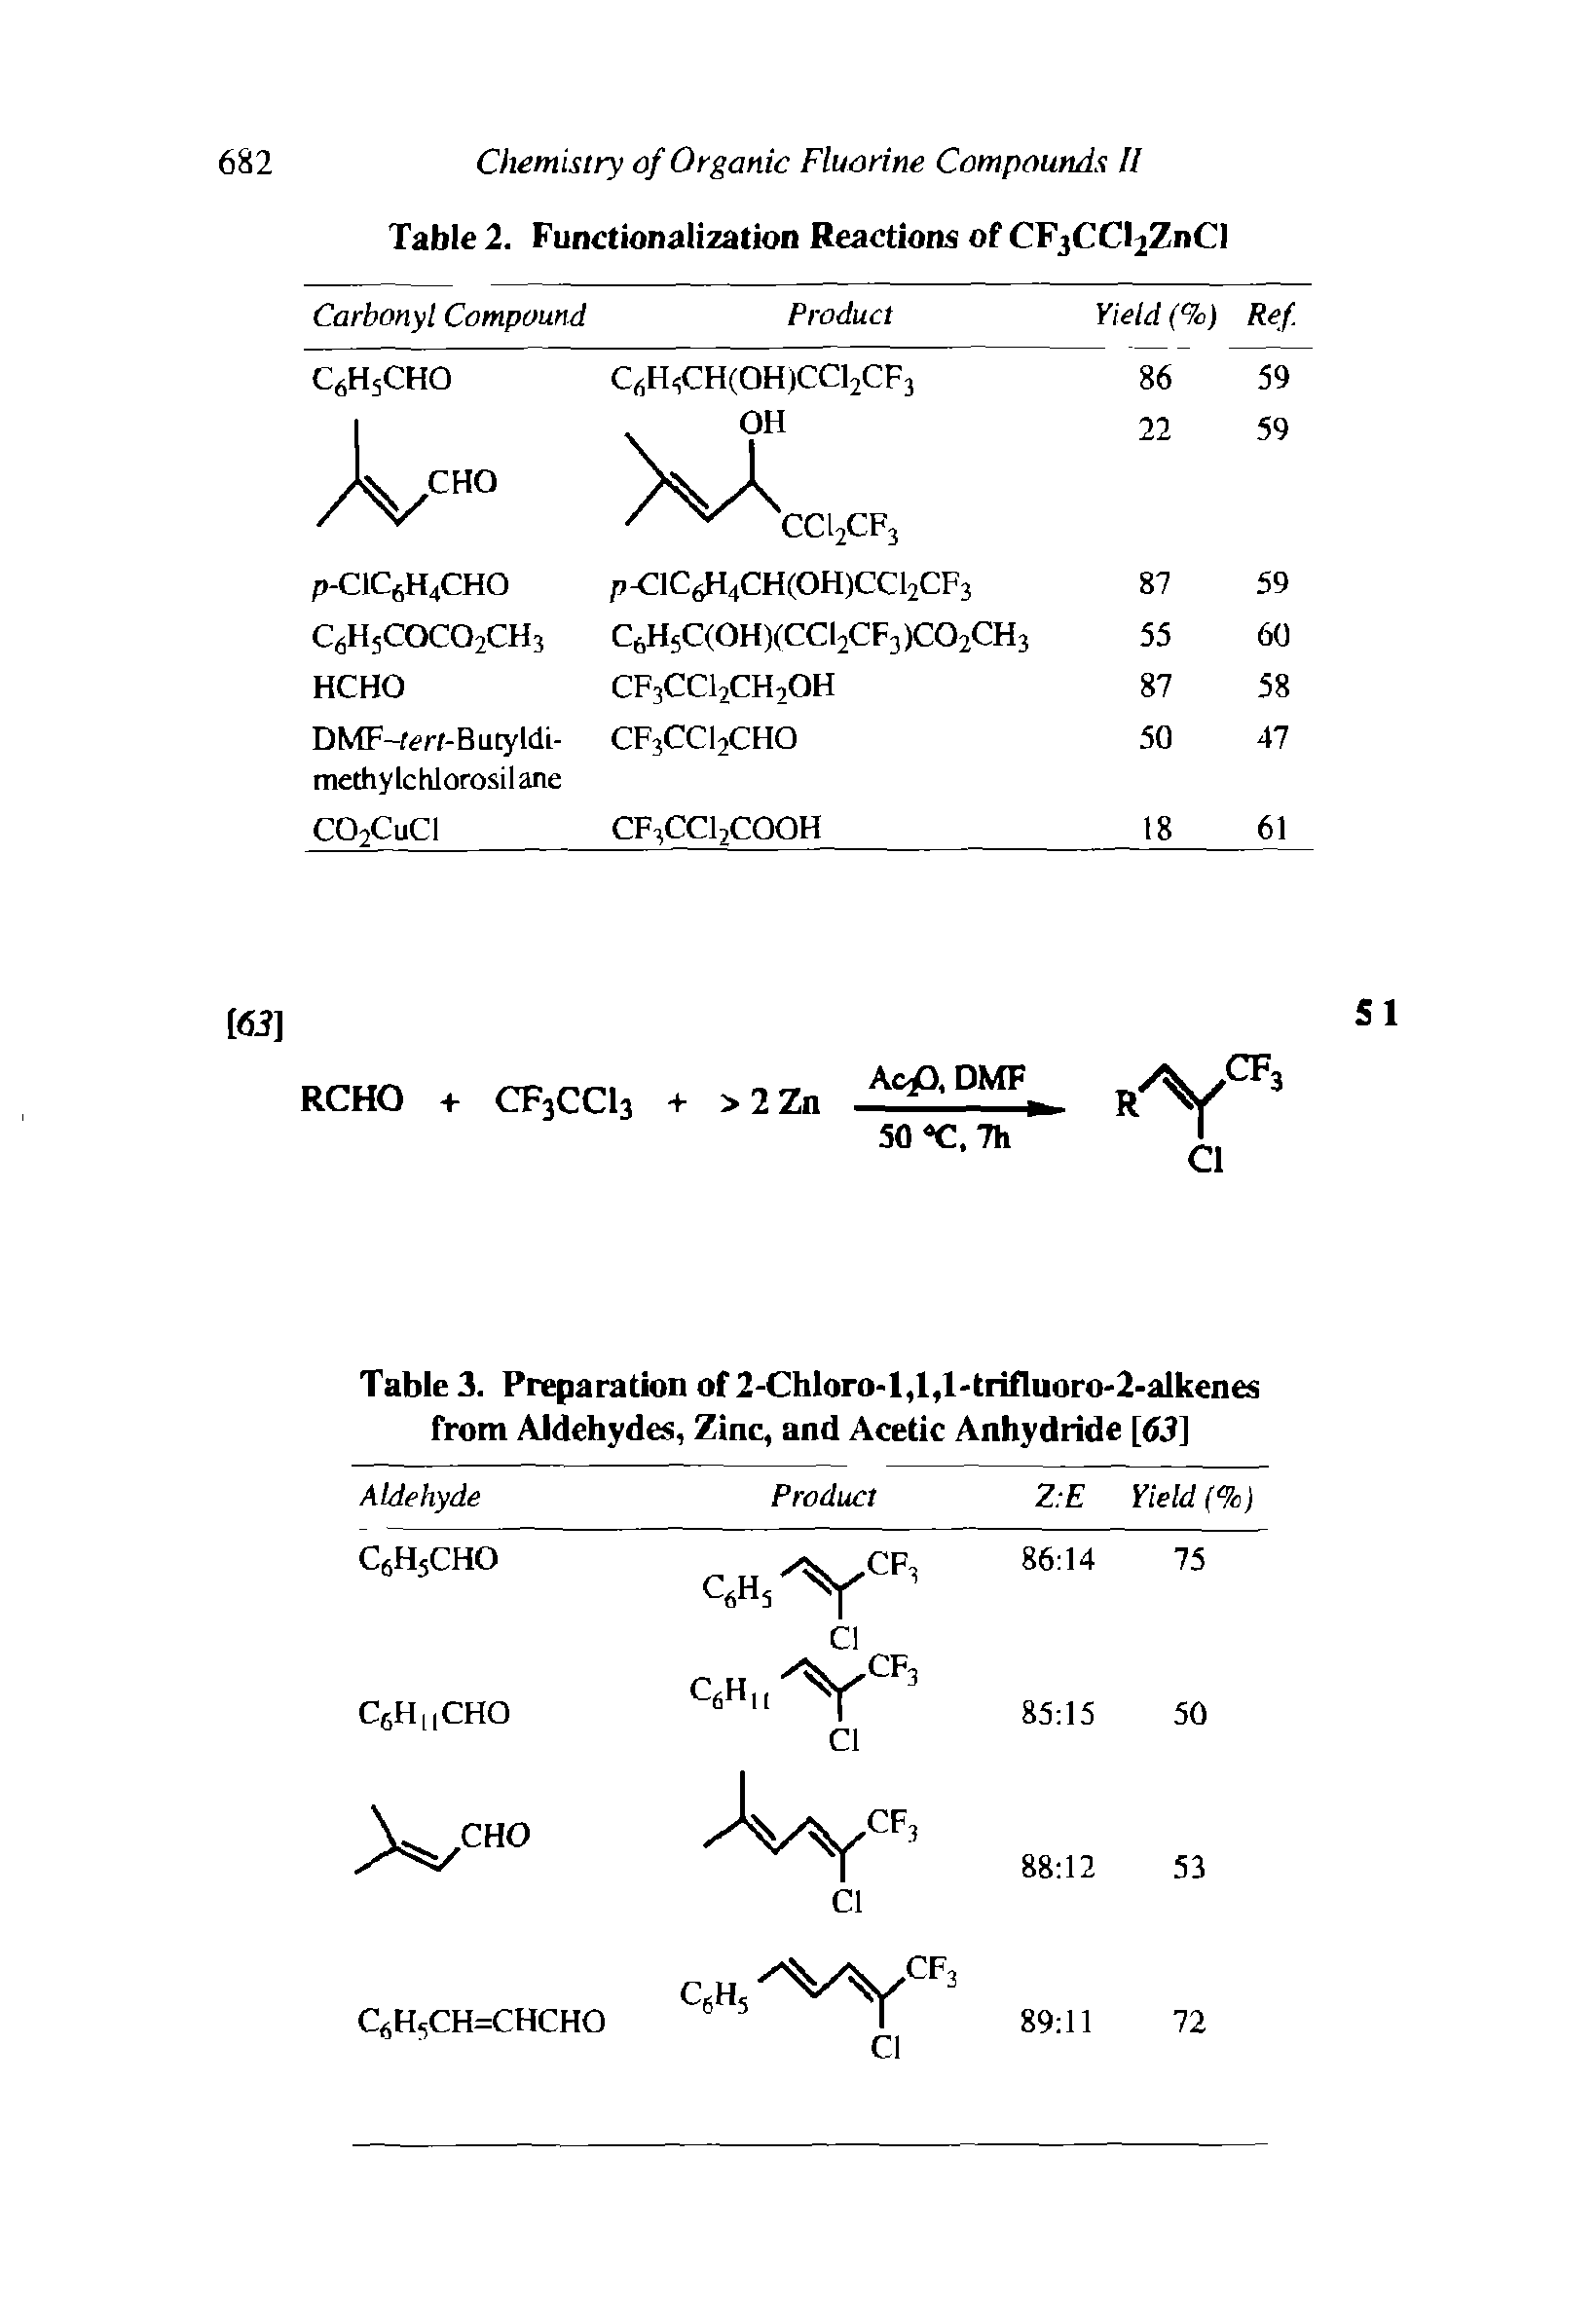 Table 3. Preparation of 2-Chloro-l,l,l trifIuorO 2-alkenes from Aldehydes, Zinc, and Acetic Anhydride [63]...